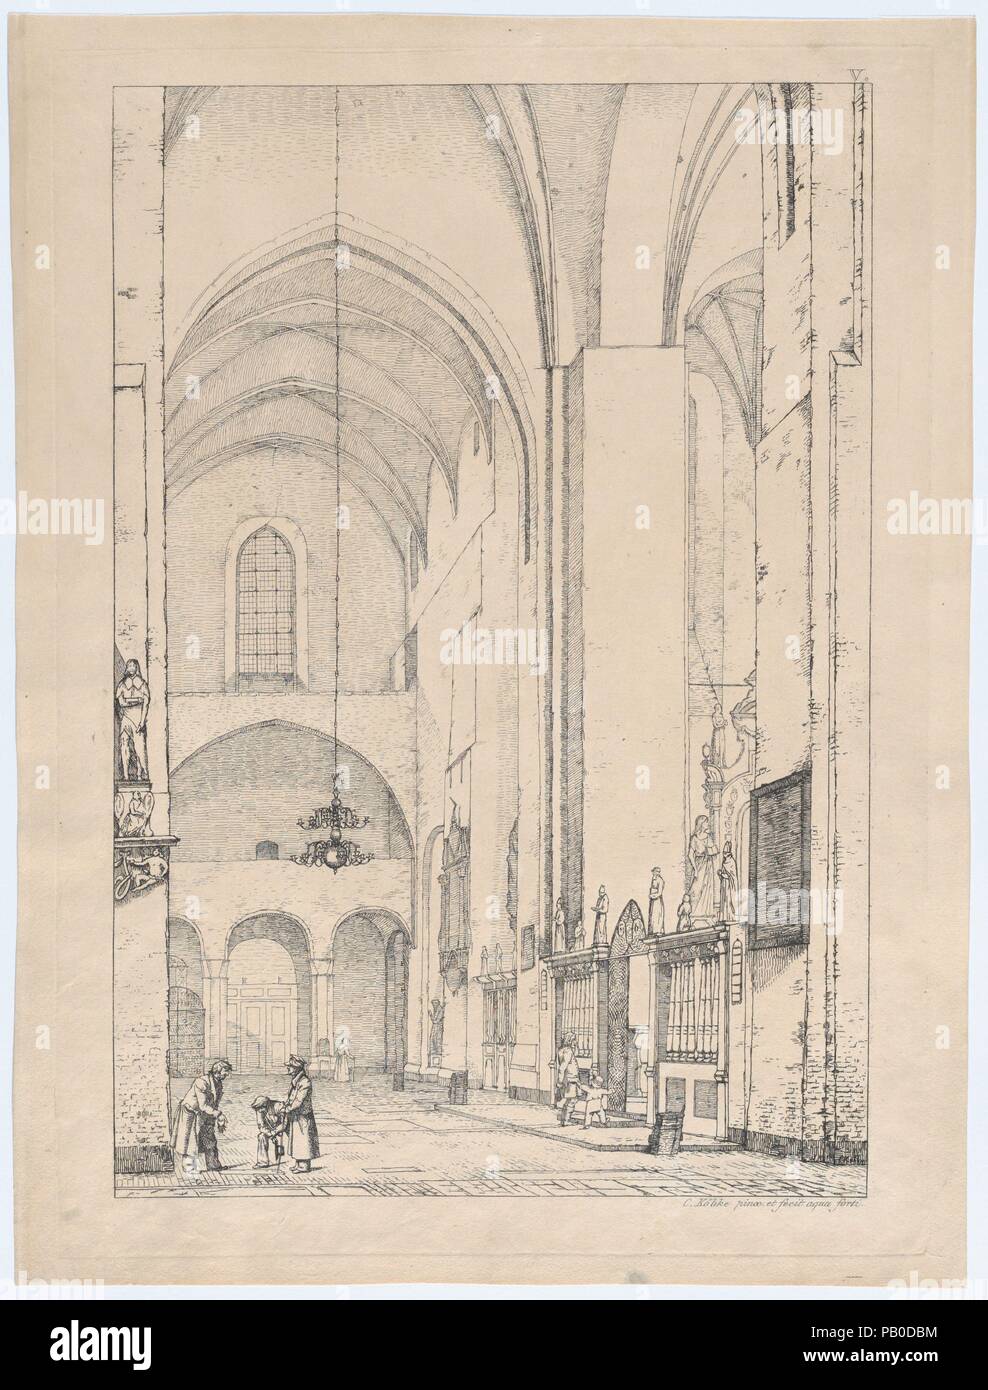 The Transept of  Aarhus Cathedral. Artist: Christen Købke (Danish, Copenhagen 1810-1848 Copenhagen). Dimensions: Sheet: 12 3/4 × 9 3/16 in. (32.4 × 23.4 cm). Date: 1831.  During a stay in Aarhus in Jutland in 1829, Købke set about painting a picture of the interior of the cathedral. He had just become the student of Christoffer Wilhelm Eckersberg and in this print demonstrates his interest in perspectival construction, so central to Eckersberg. Also, at this moment, the Danish art historian Niels Lauritz Høyen strated traveling throughout Denmark to examine and document medieval and Renaissanc Stock Photo